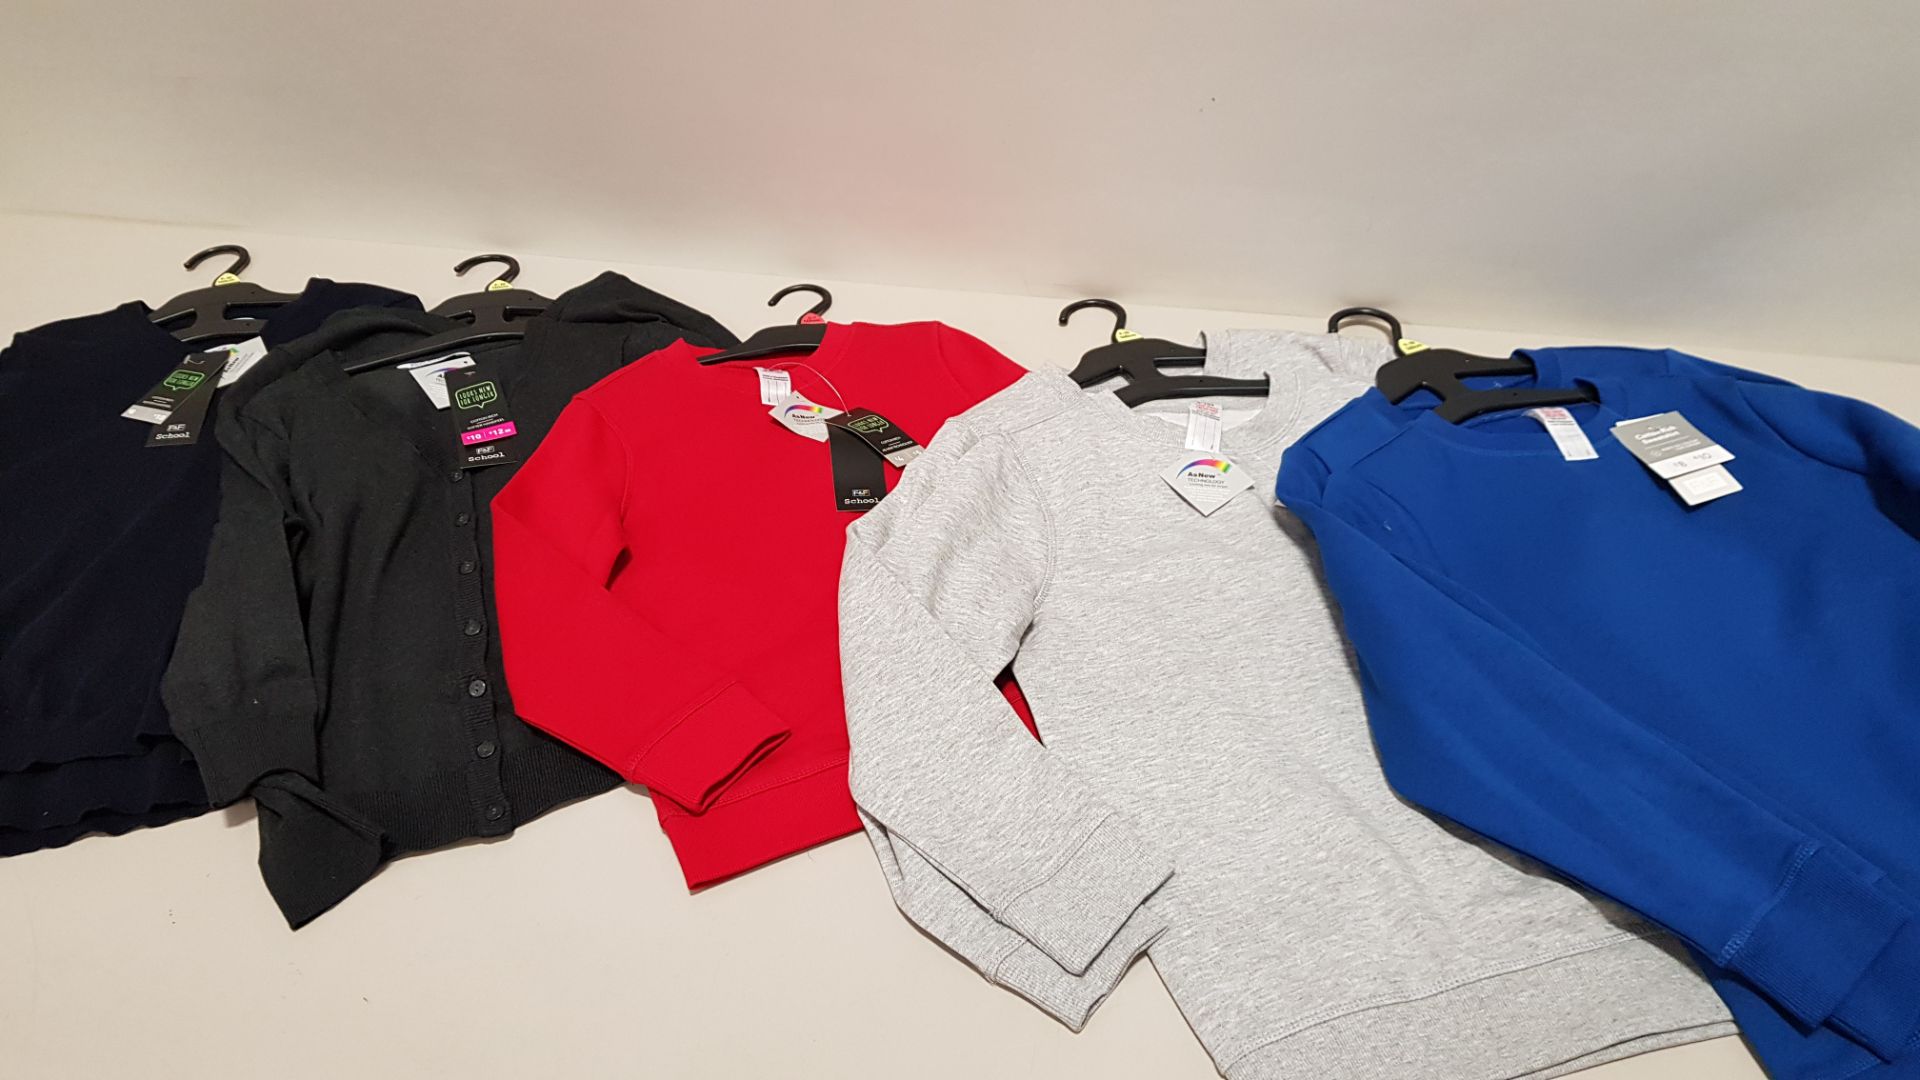 APPROX 240 X BRAND NEW ASSORTED BOYS COTTON RICH SWEATSHIRTS IN COLOURS RED, BLUE, BLACK ETC - IN